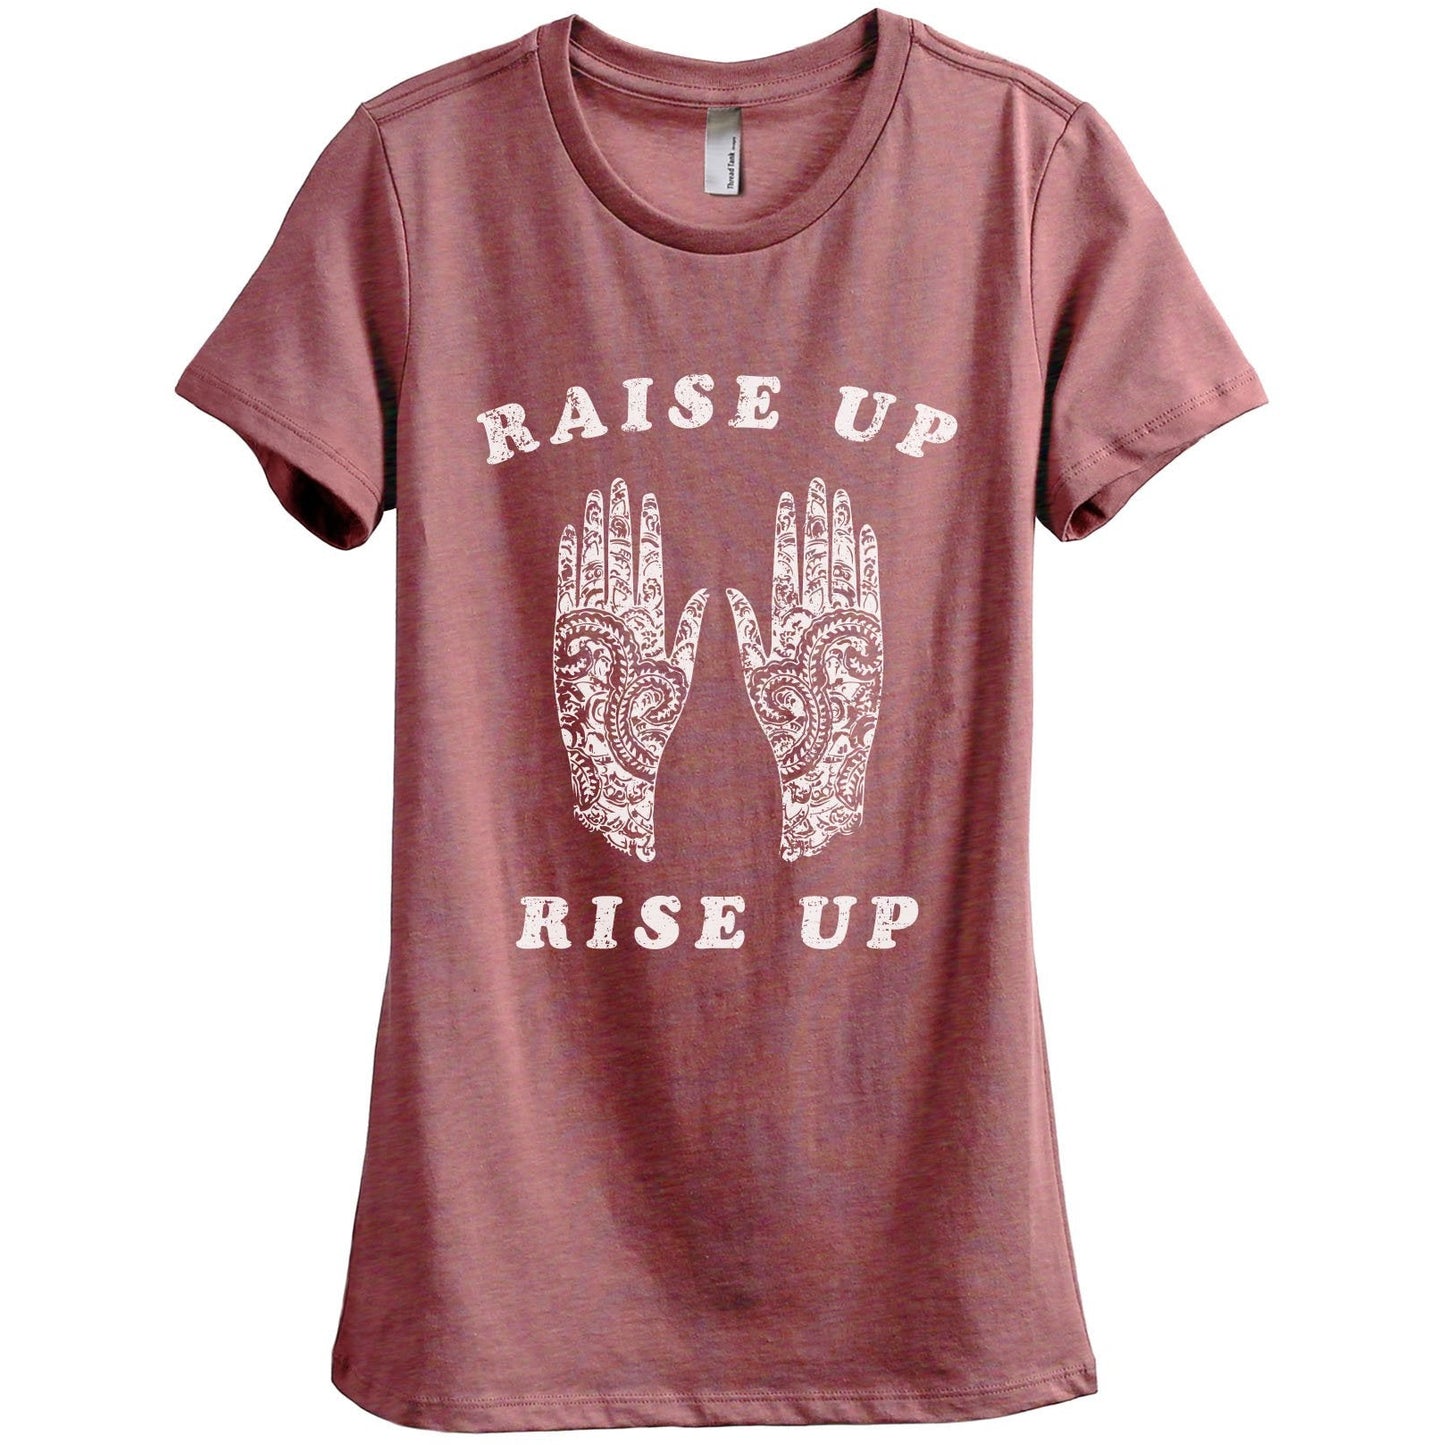 Raise Up Rise Up